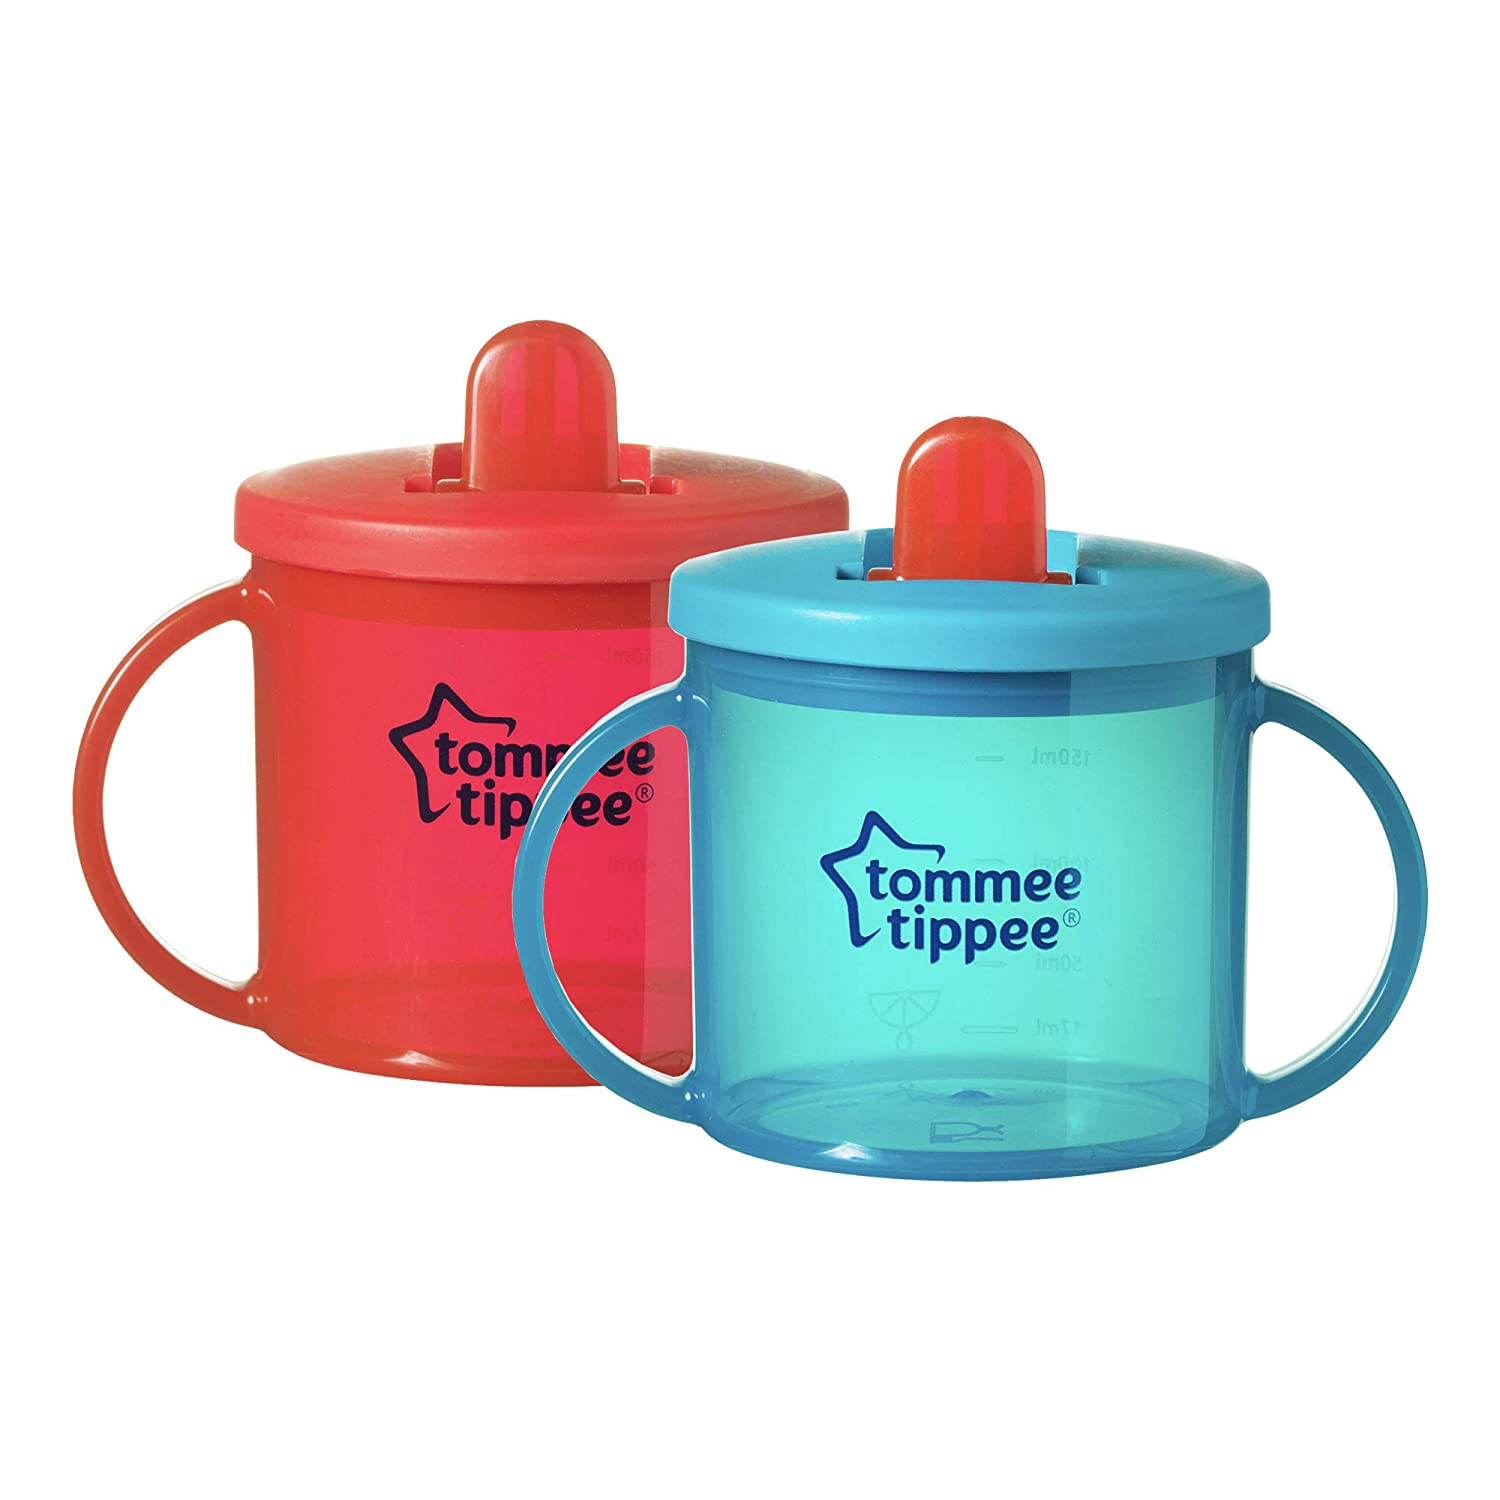 Tommee Tippee Free Flow 190 ml Tumbler, Red/ Turquoise